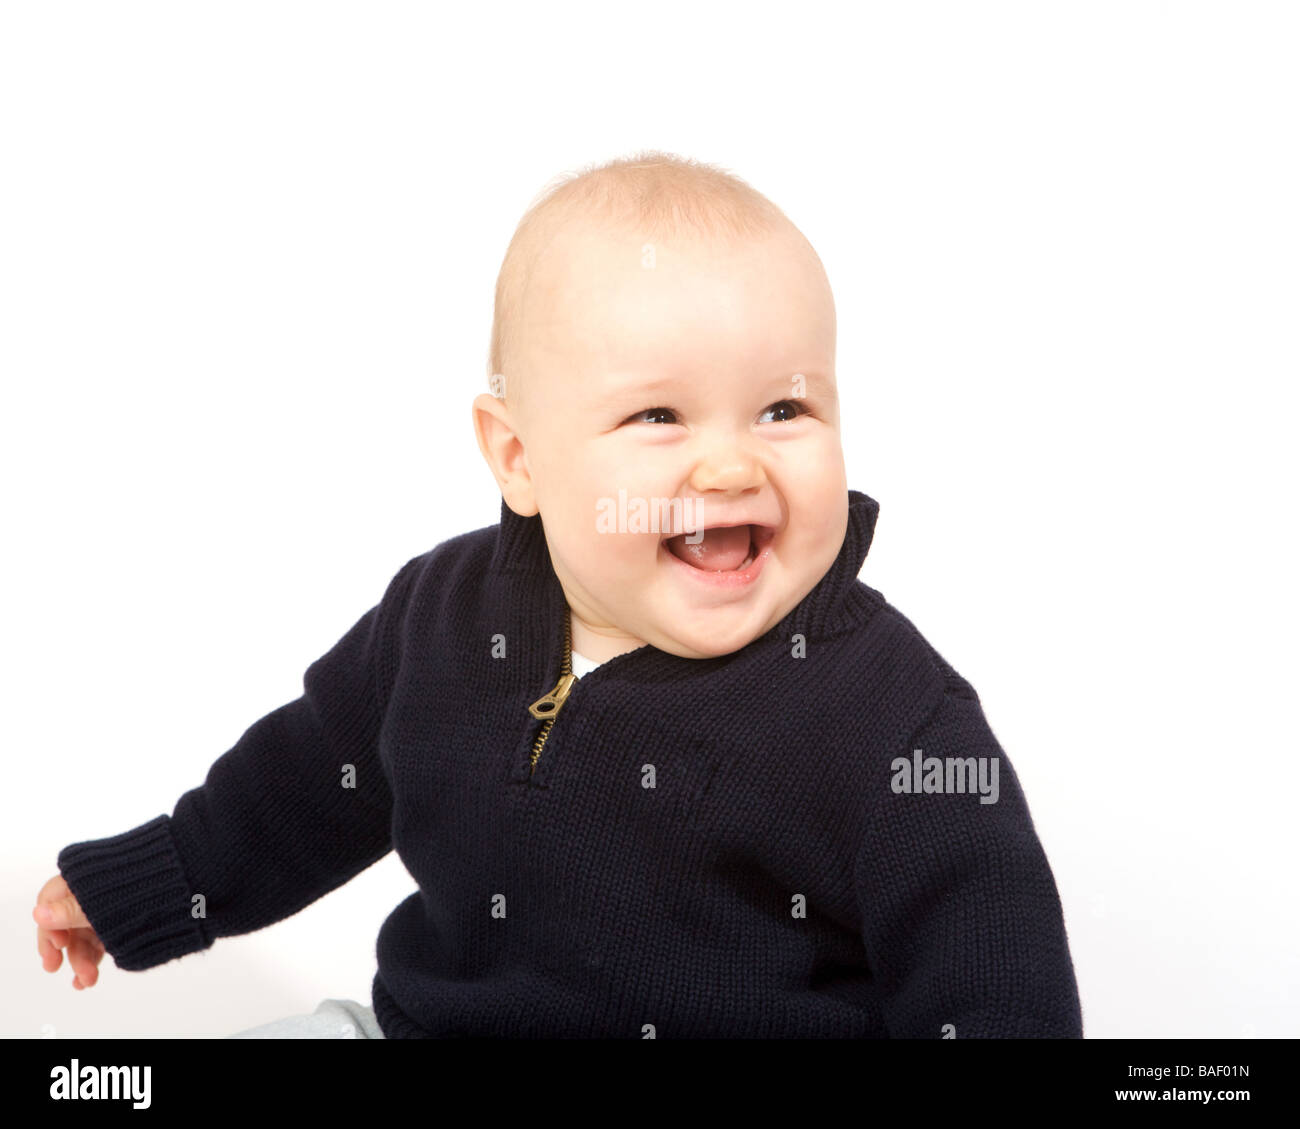 Young boy against a white background Stock Photo